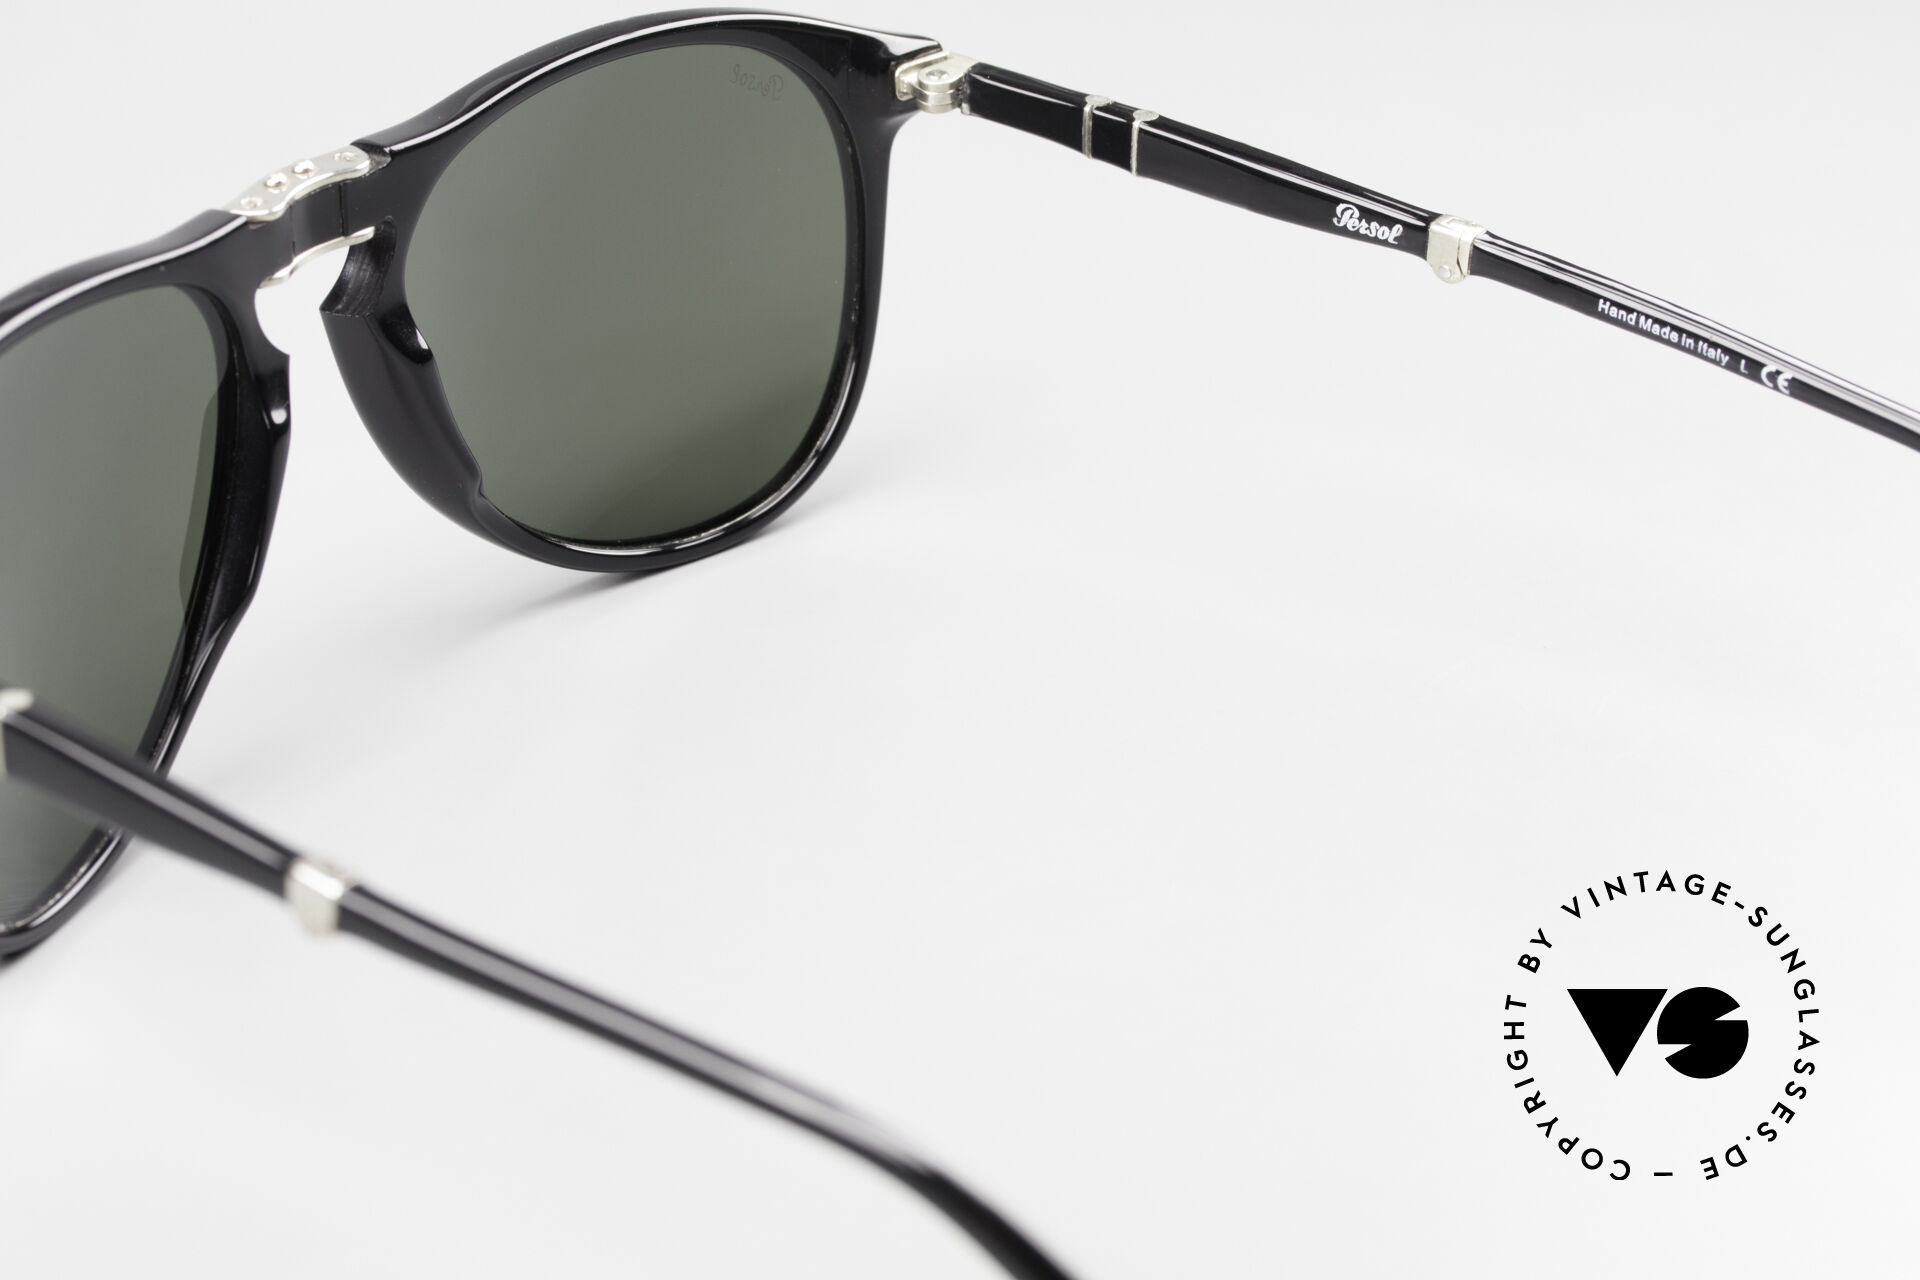 Sunglasses Persol 9714 Folding Inspired By The 714 Ratti